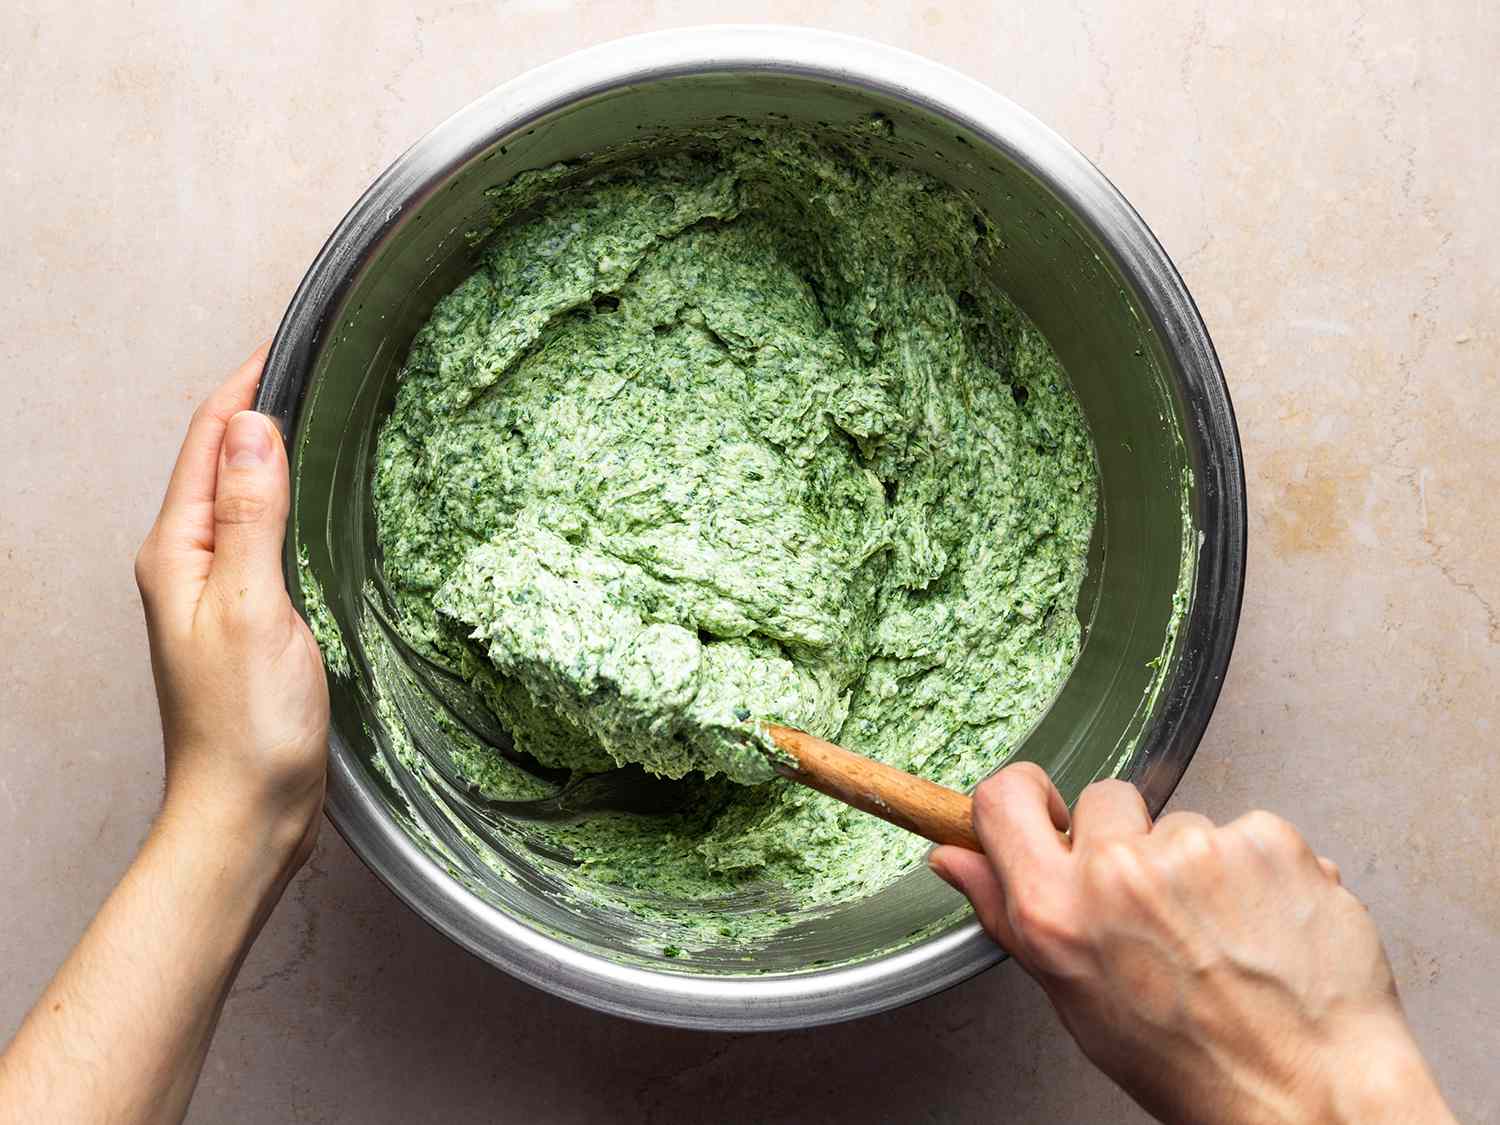 The ricotta being mixed with cooked and processed spinach in a metal bowl.